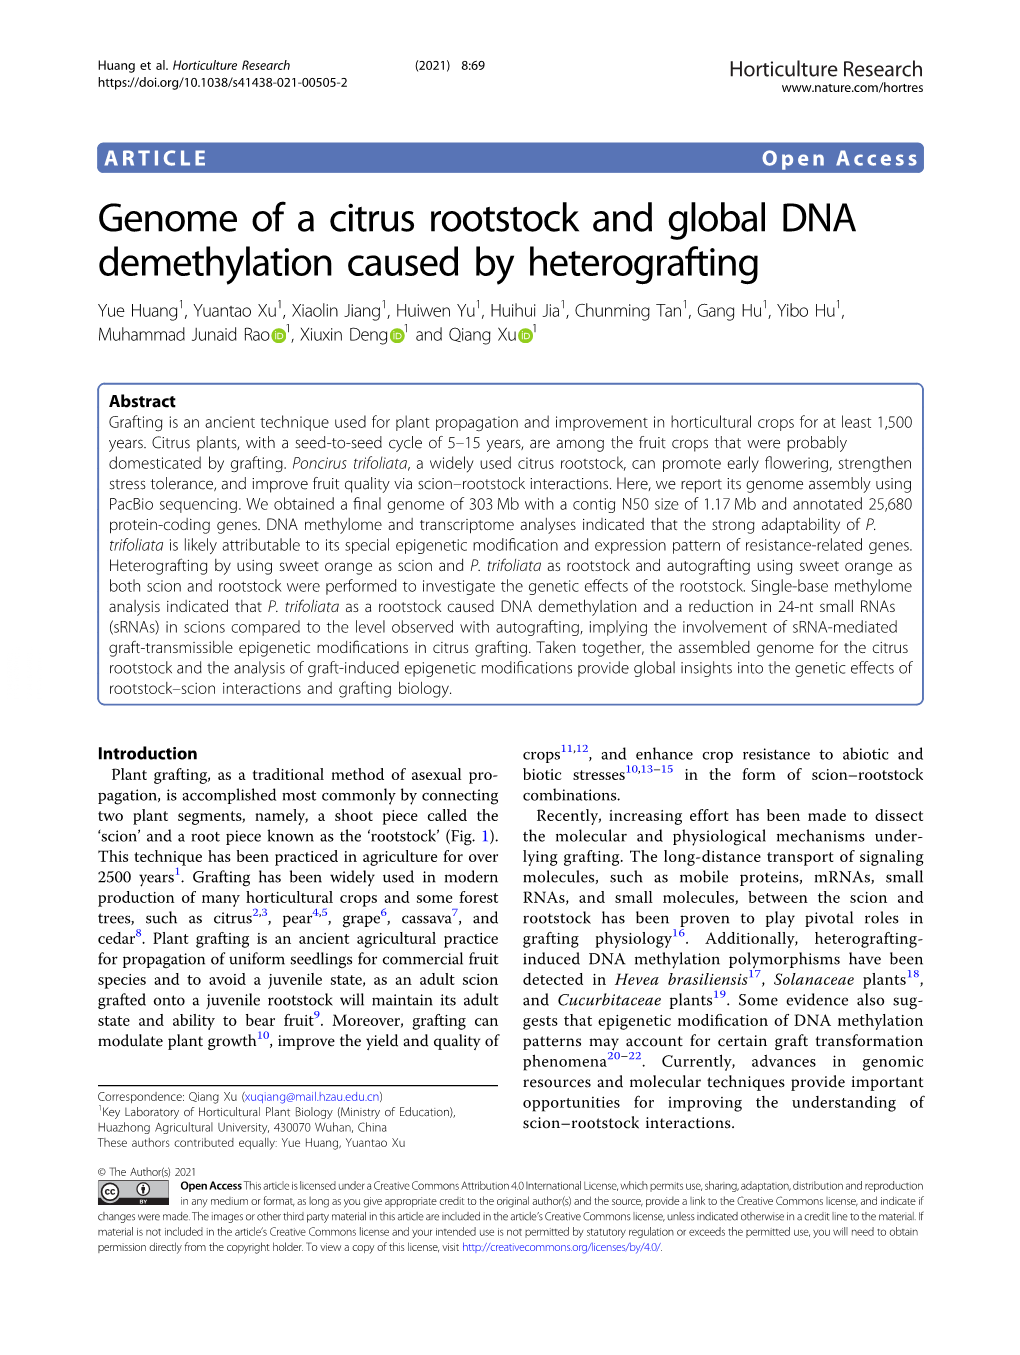 Genome of a Citrus Rootstock and Global DNA Demethylation Caused